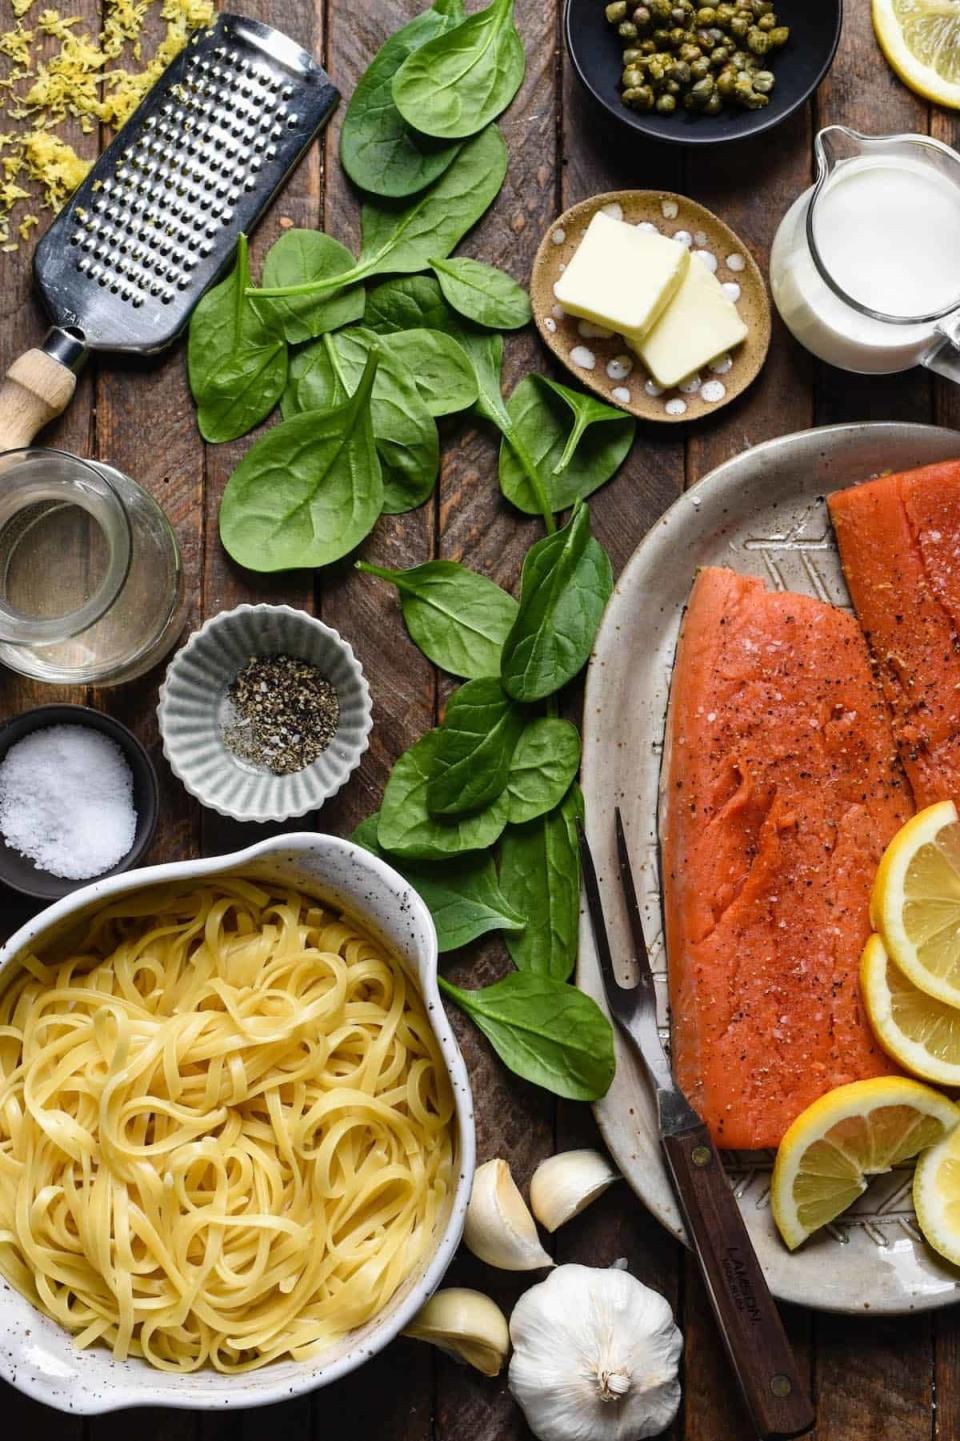 Ingredients for a pasta dish include uncooked pasta, salmon, spinach, lemon slices, garlic, capers, grated cheese, butter, and seasonings on a wooden surface